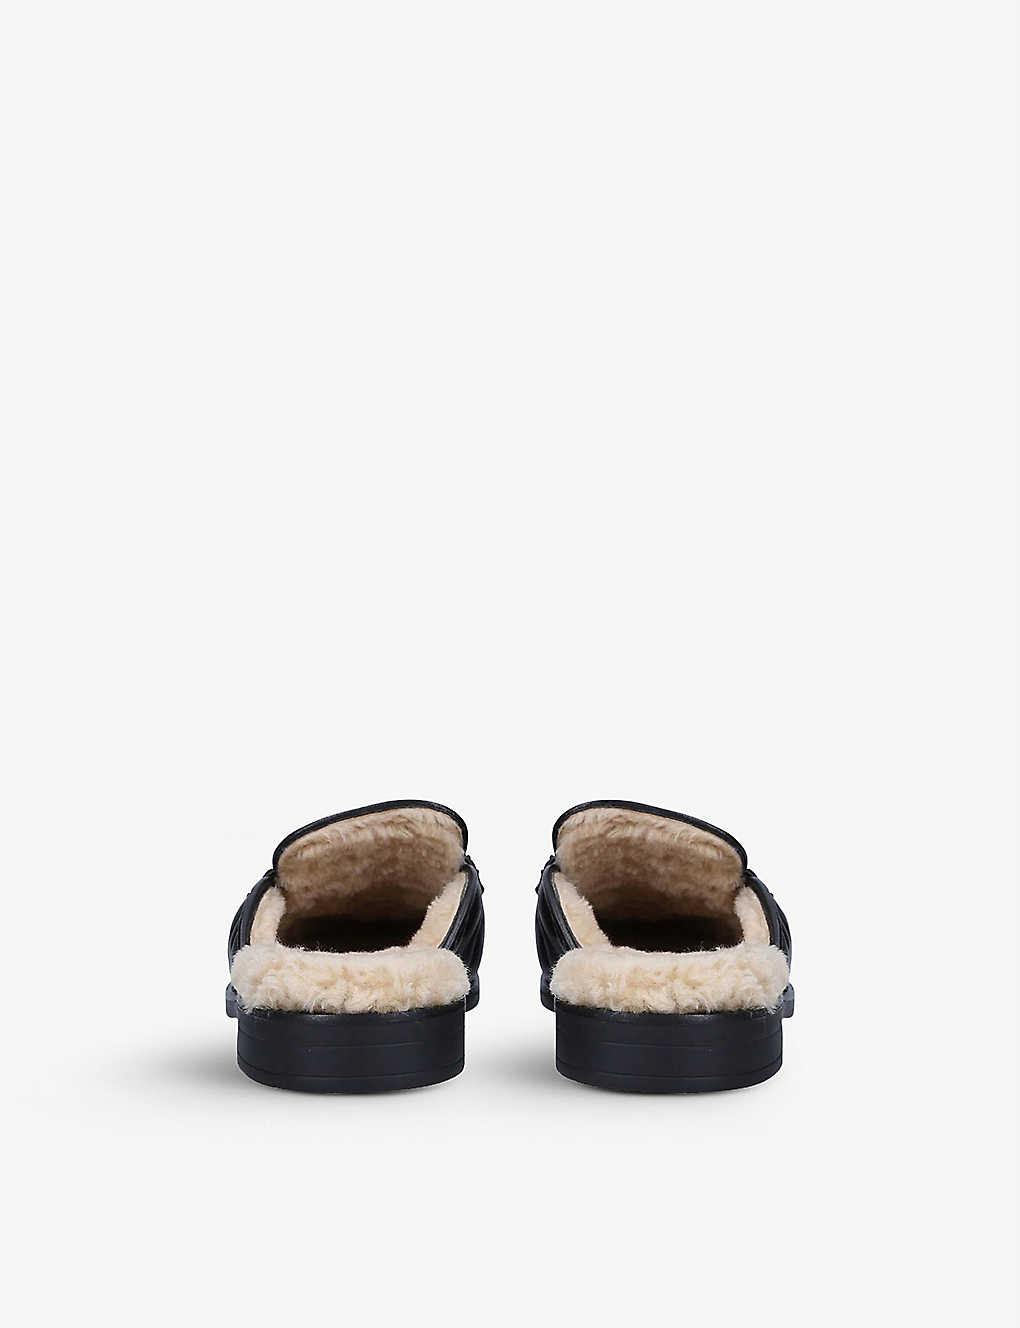 GUCCI Women's Marmont shearling-lined leather mules